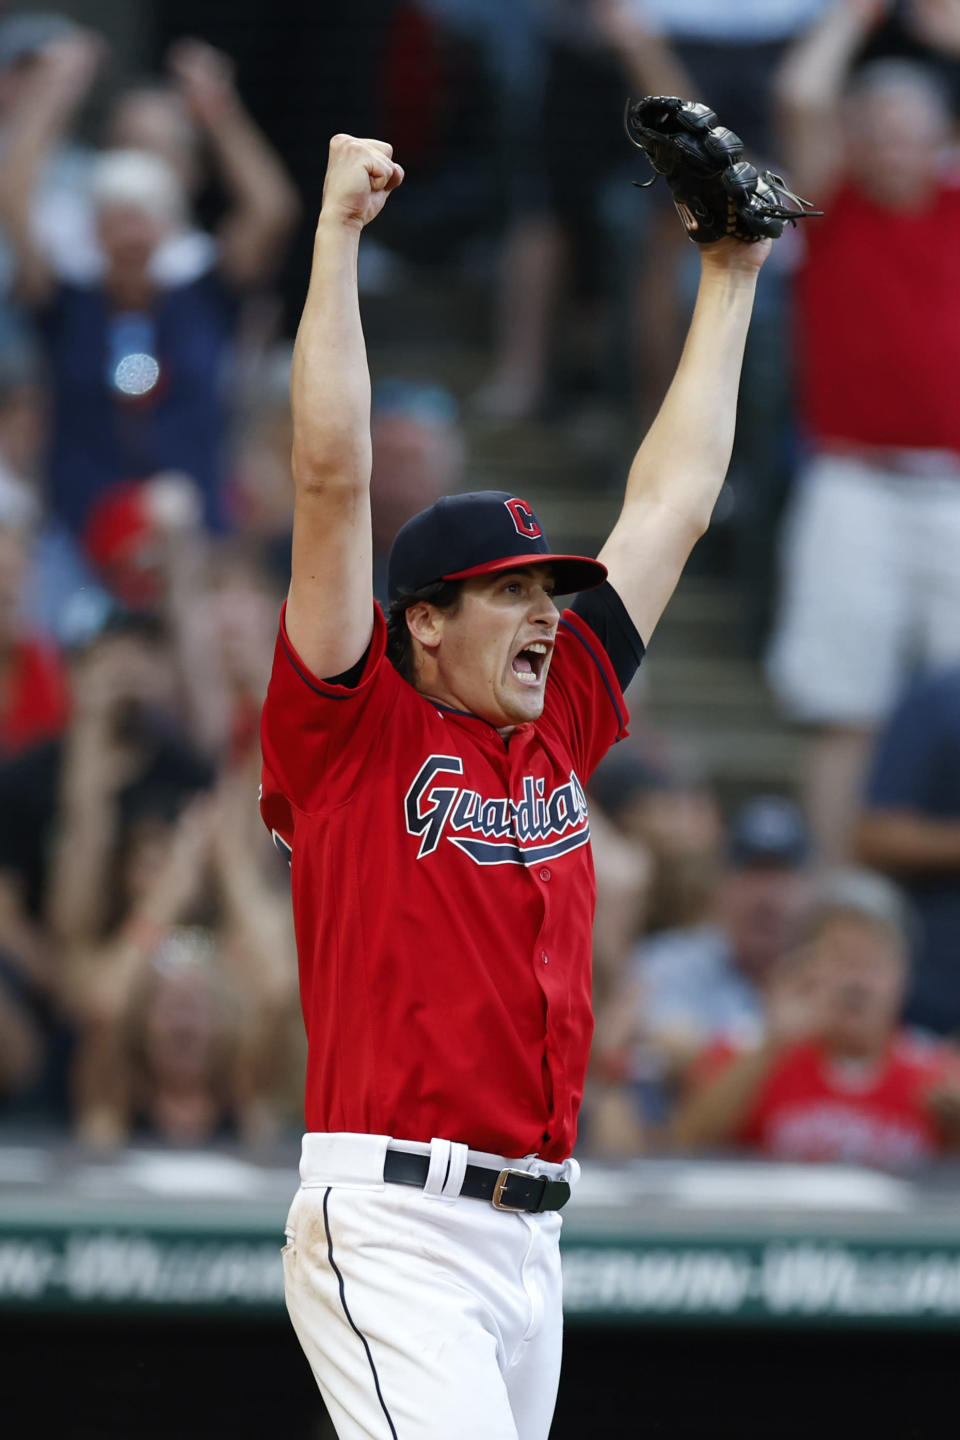 Cleveland Guardians starting pitcher Cal Quantrill celebrates a defensive play that saved a run, against the Boston Red Sox during the fifth inning of a baseball game Friday, June 24, 2022, in Cleveland. (AP Photo/Ron Schwane)